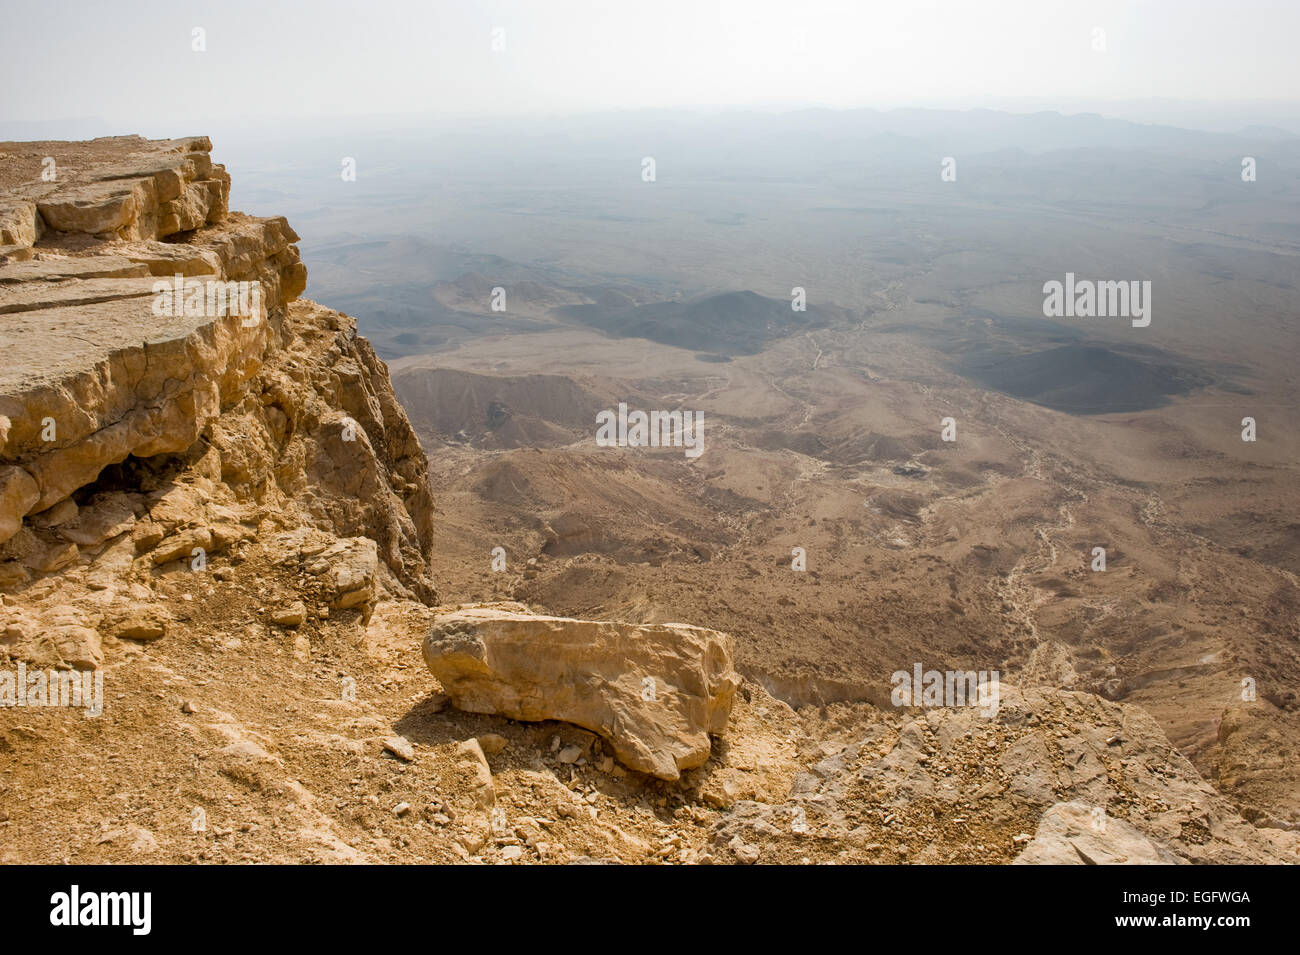 View from the edge into the Makhtesh ramon crater in the negev desert Stock Photo